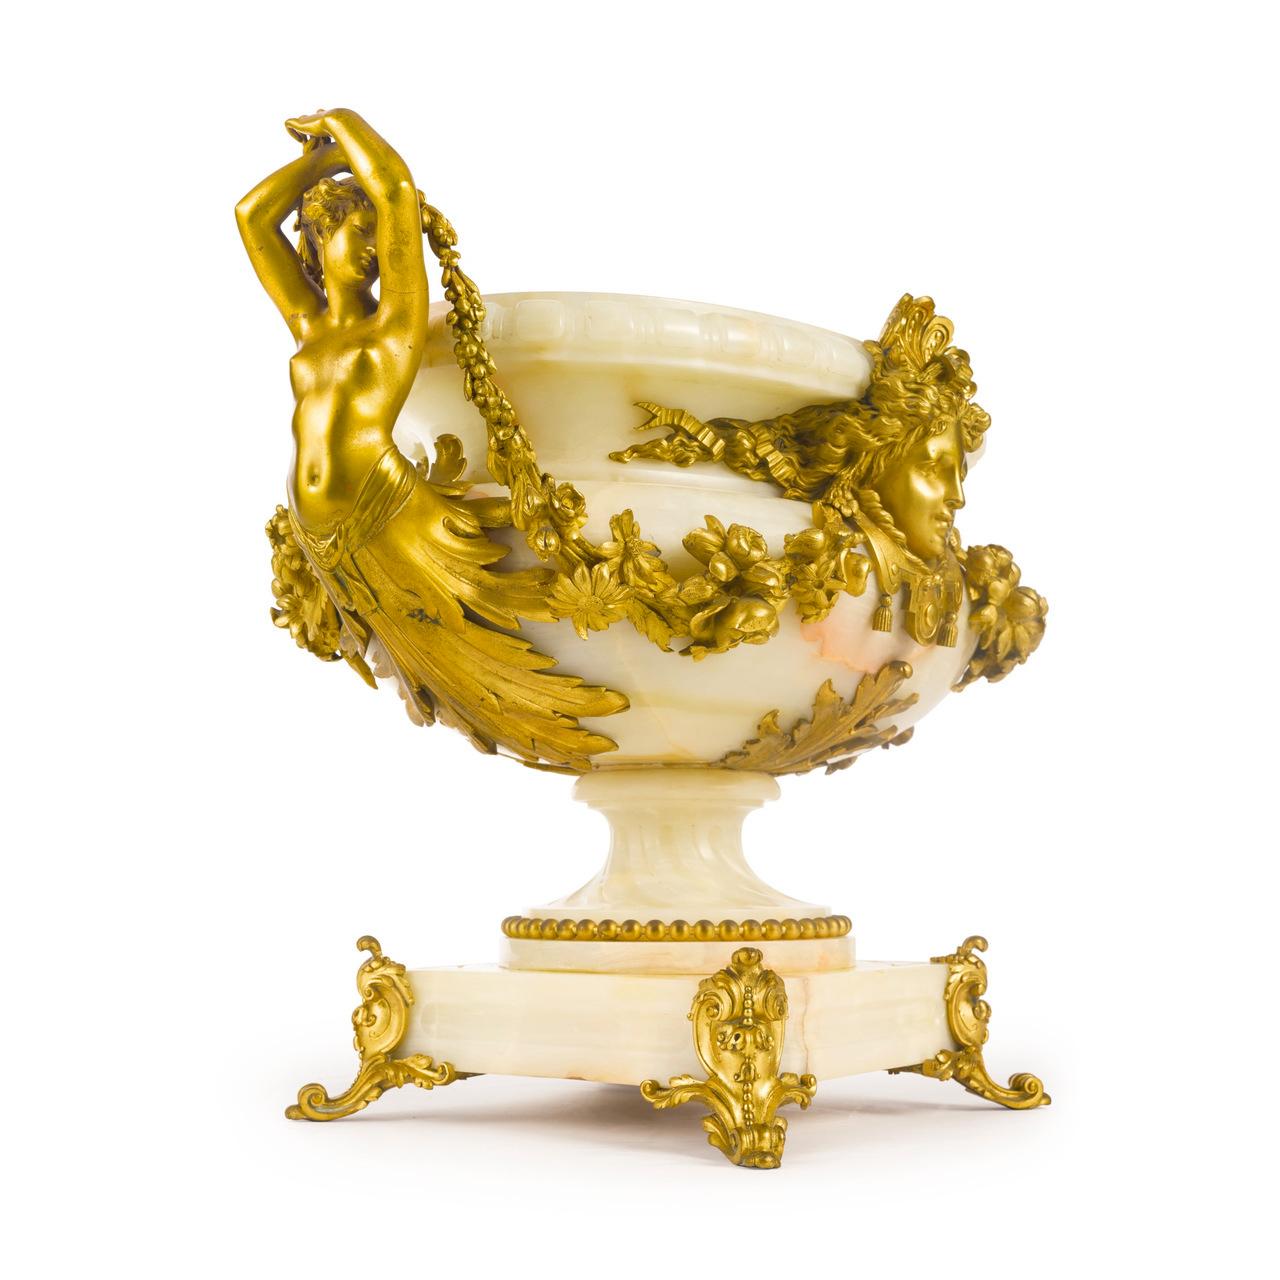 French 19th Century Louis XVI Gilt Bronze Mounted Onyx Centrepiece For Sale